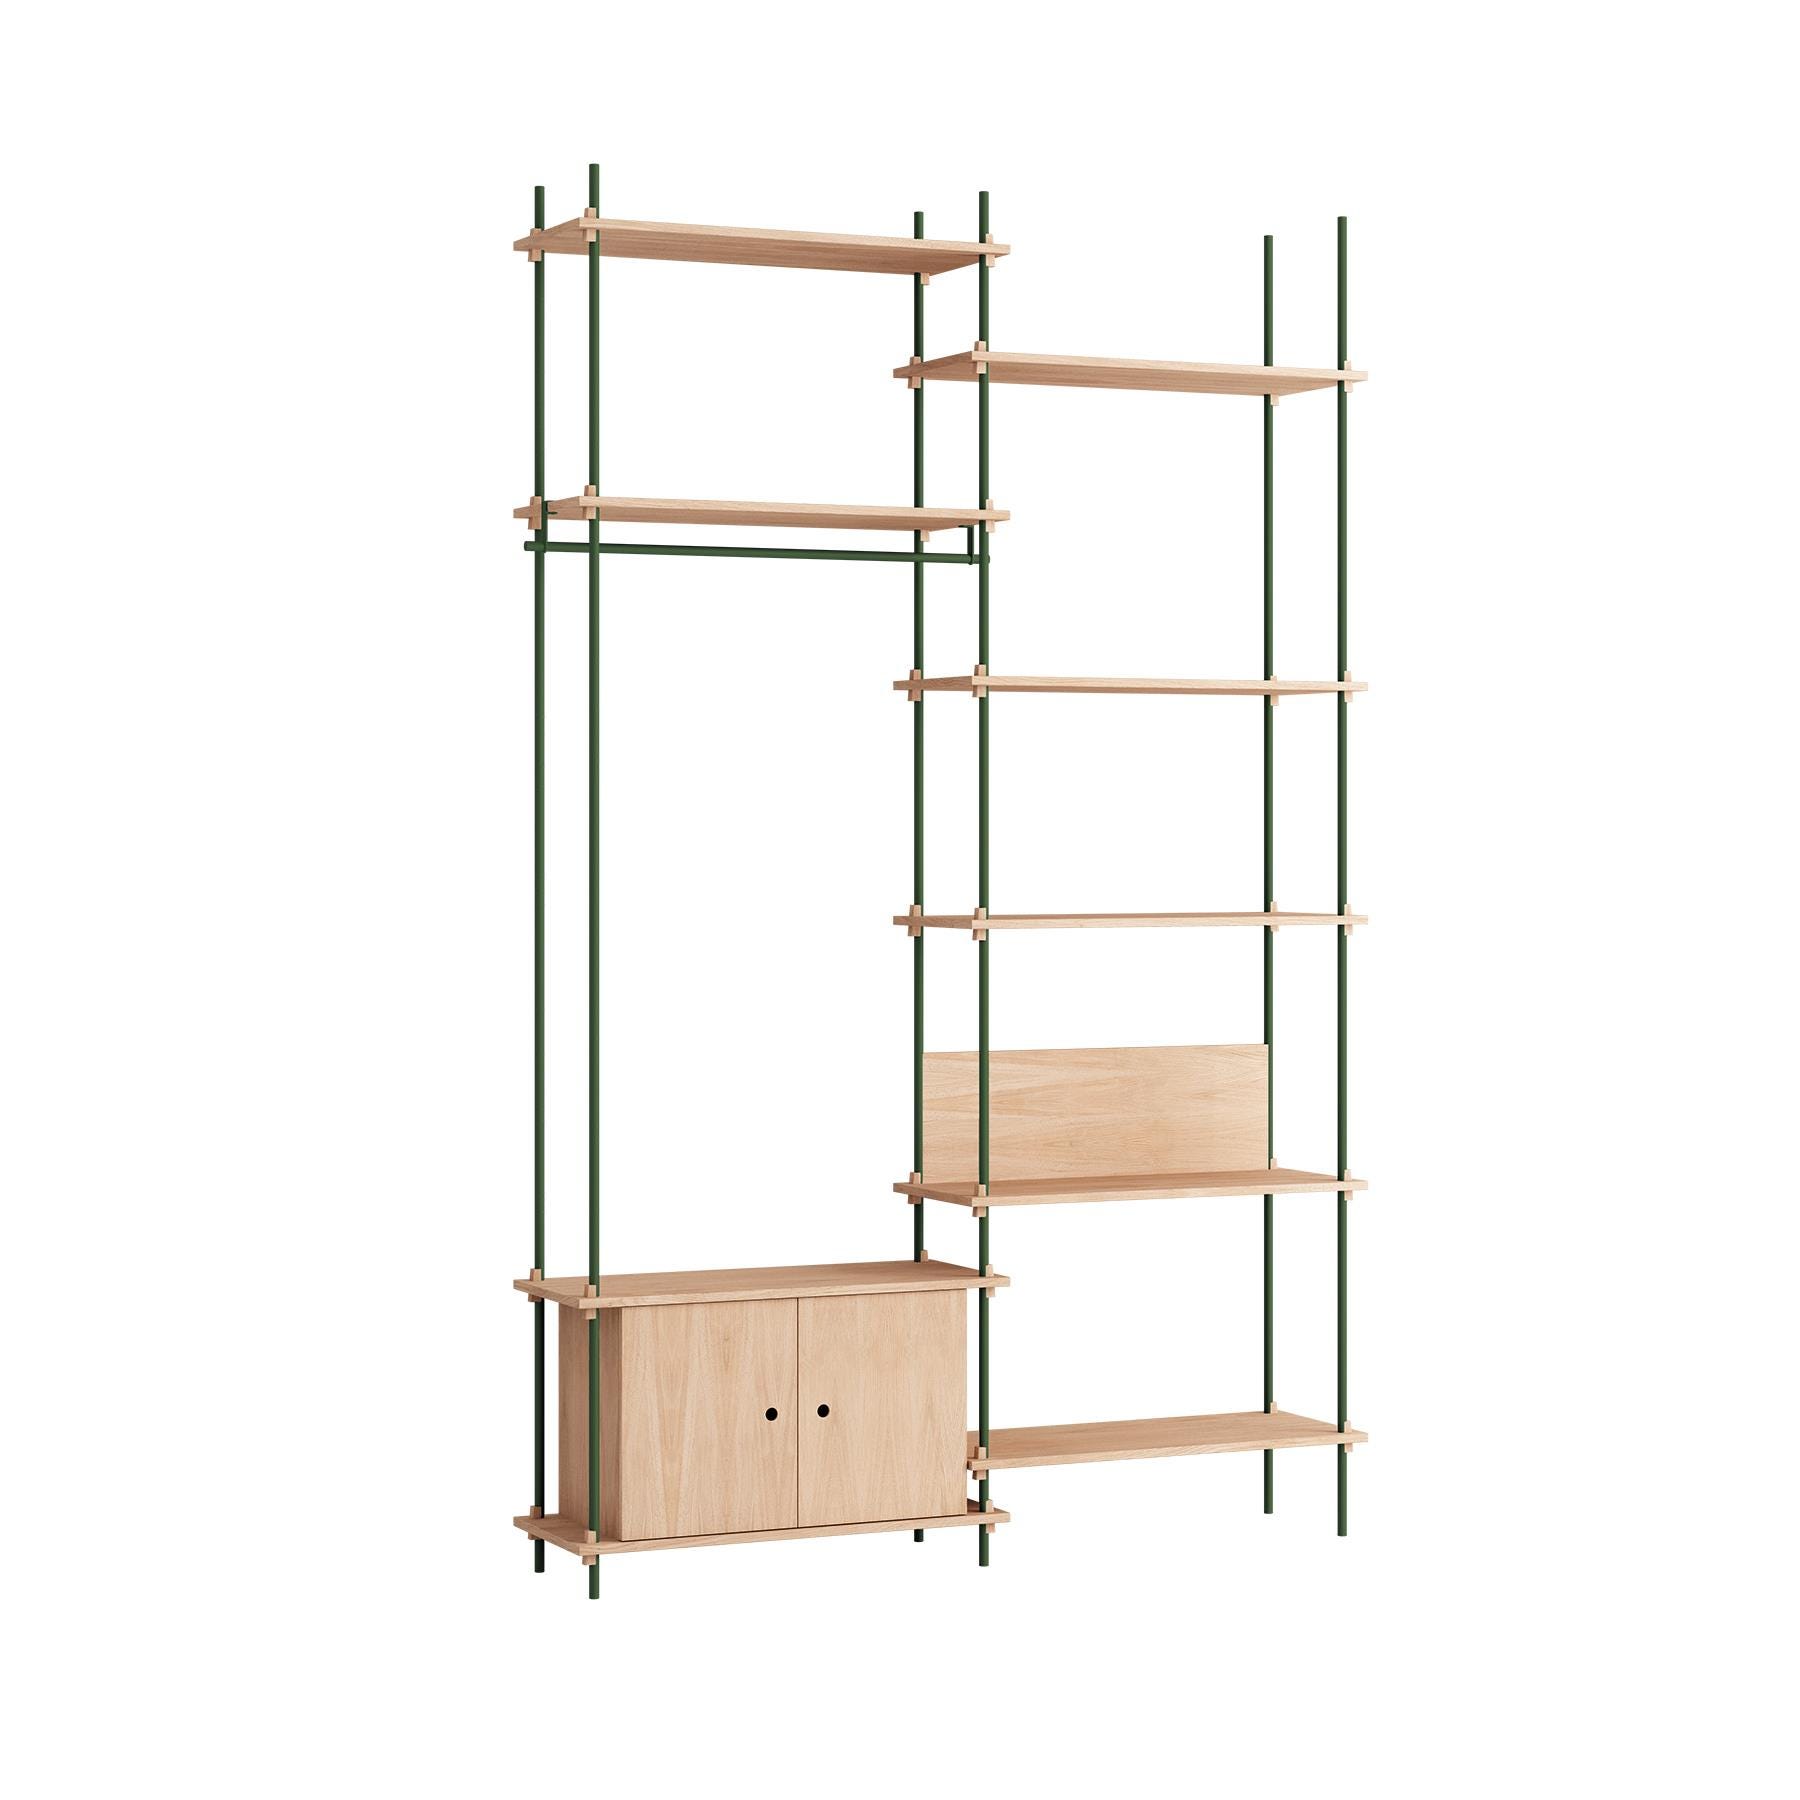 Moebe Double Shelving System 1 Cabinet Desk And Clothes Rail Oak Pine Green Light Wood Designer Furniture From Holloways Of Ludlow